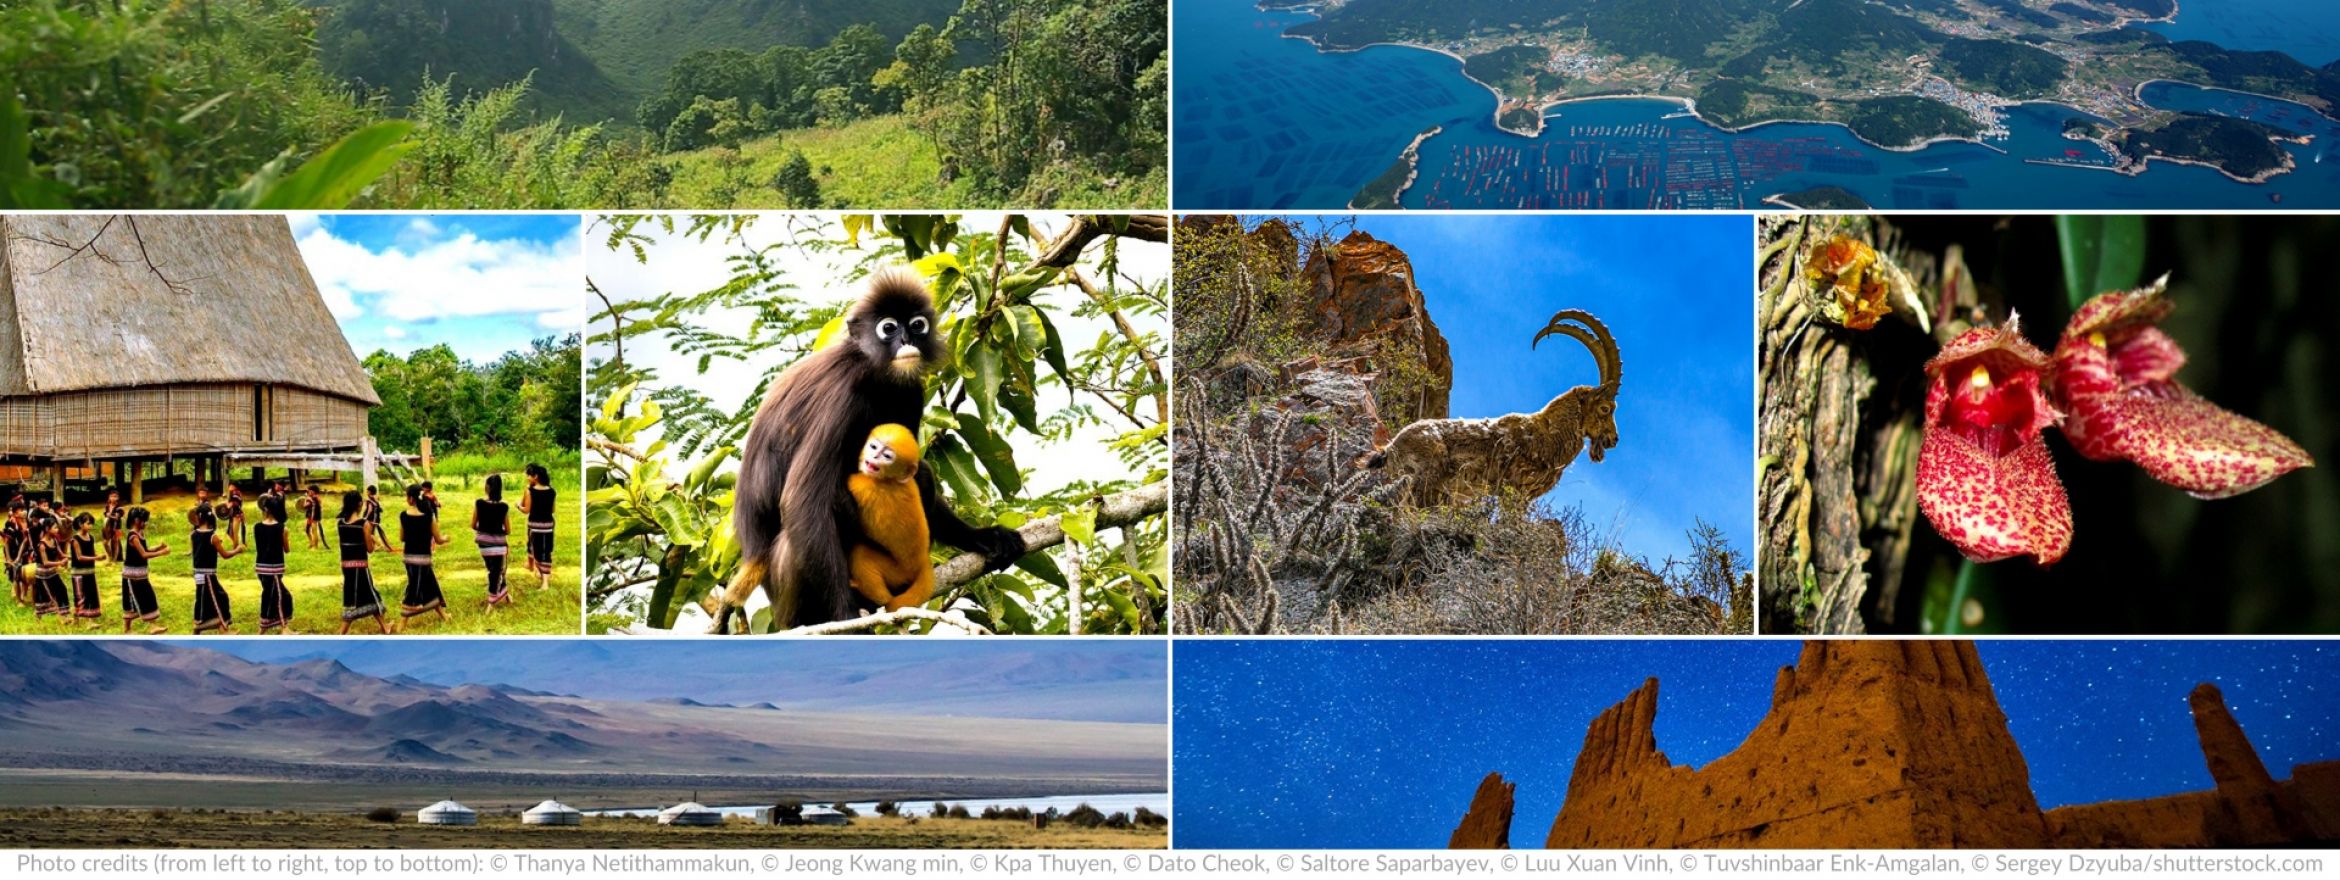 UNESCO’s Man and the Biosphere (MAB) Programme adds 8 new Asia-Pacific biosphere properties to its World Network of Biosphere Reserves